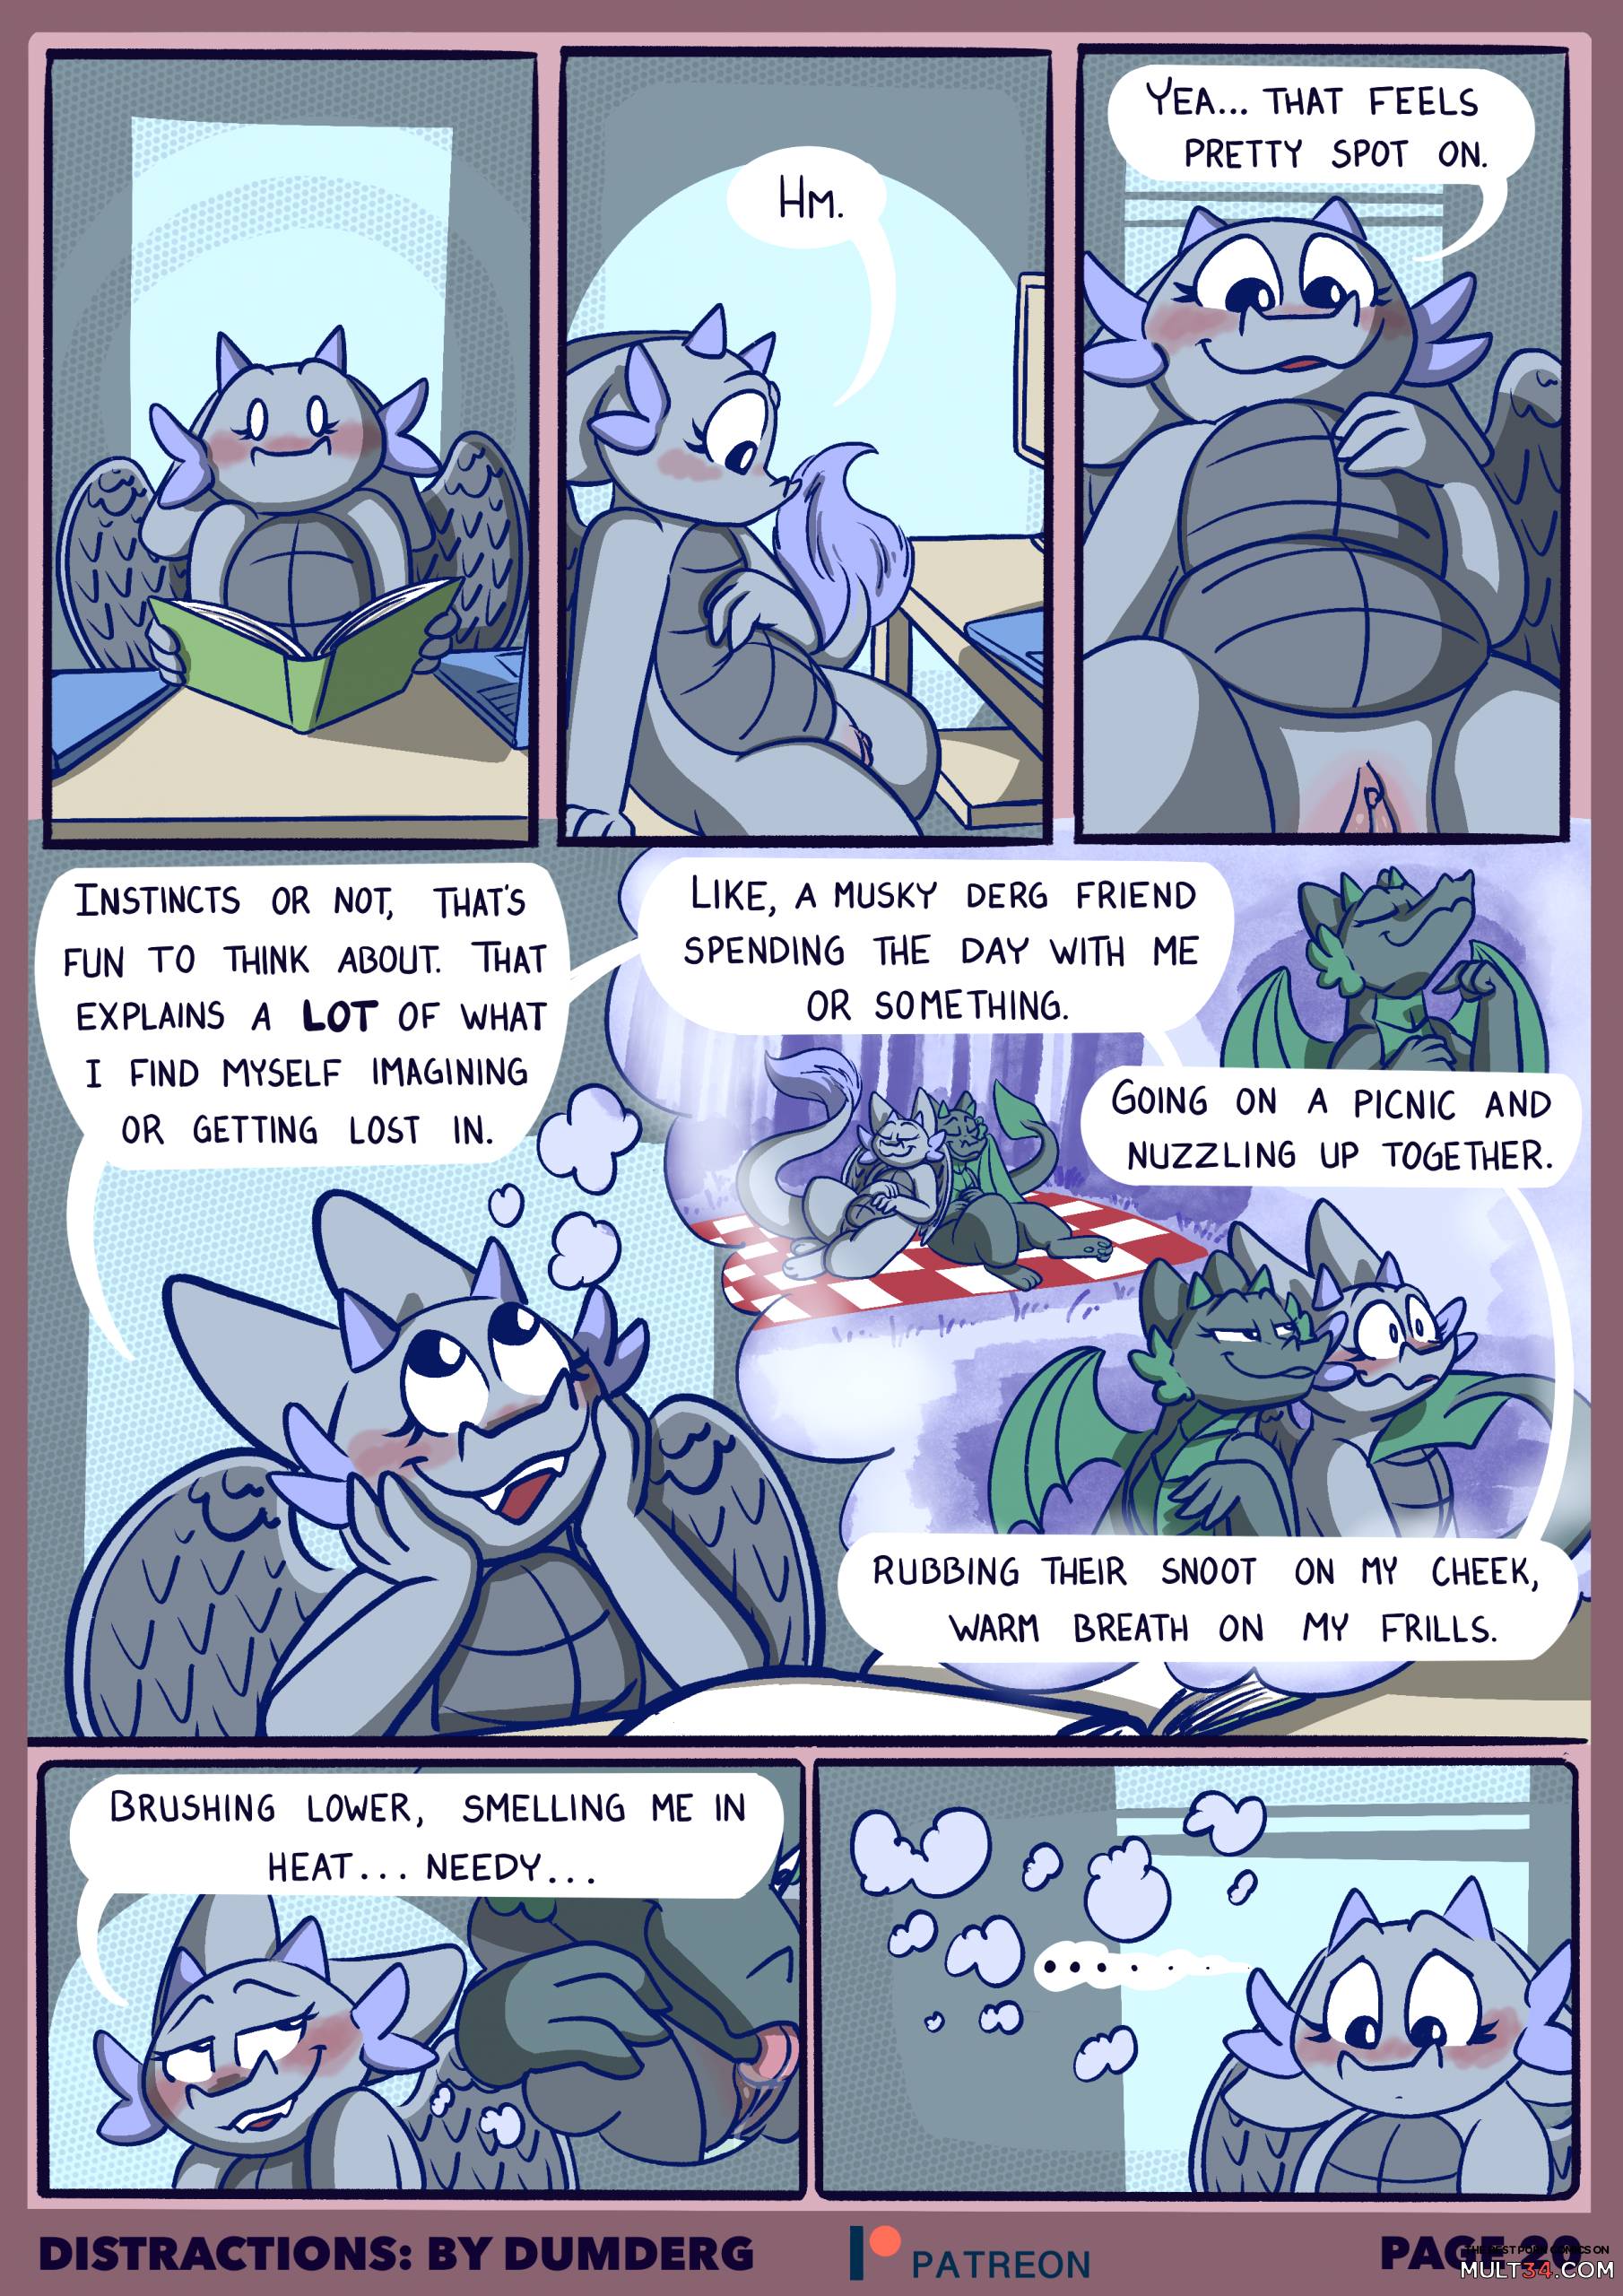 Distractions - DumDerg page 21